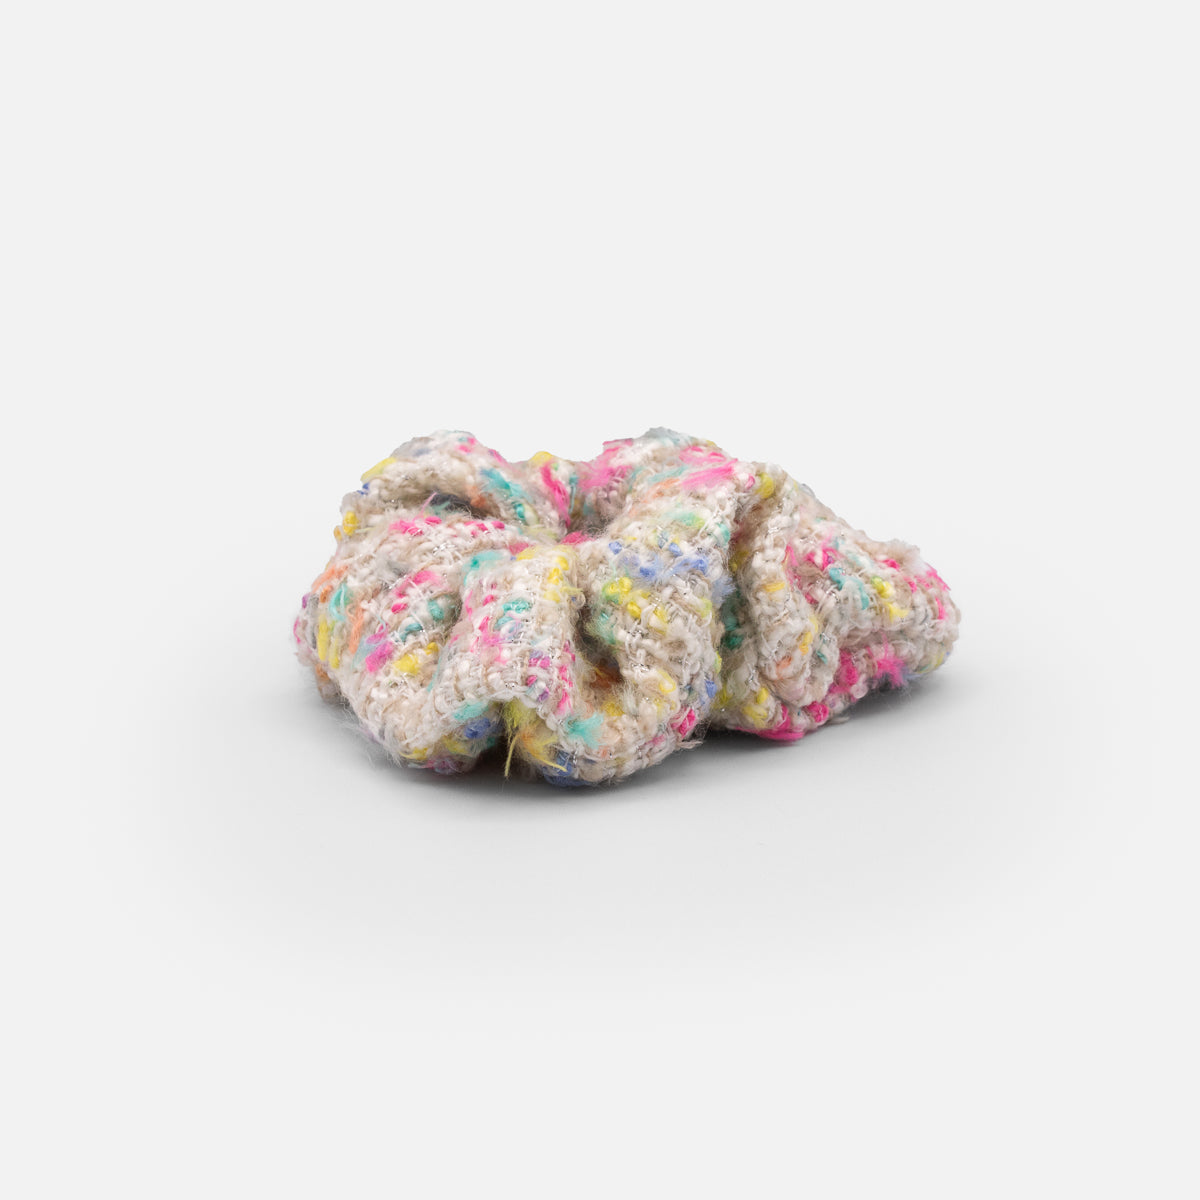 Multicolored knitted scrunchie